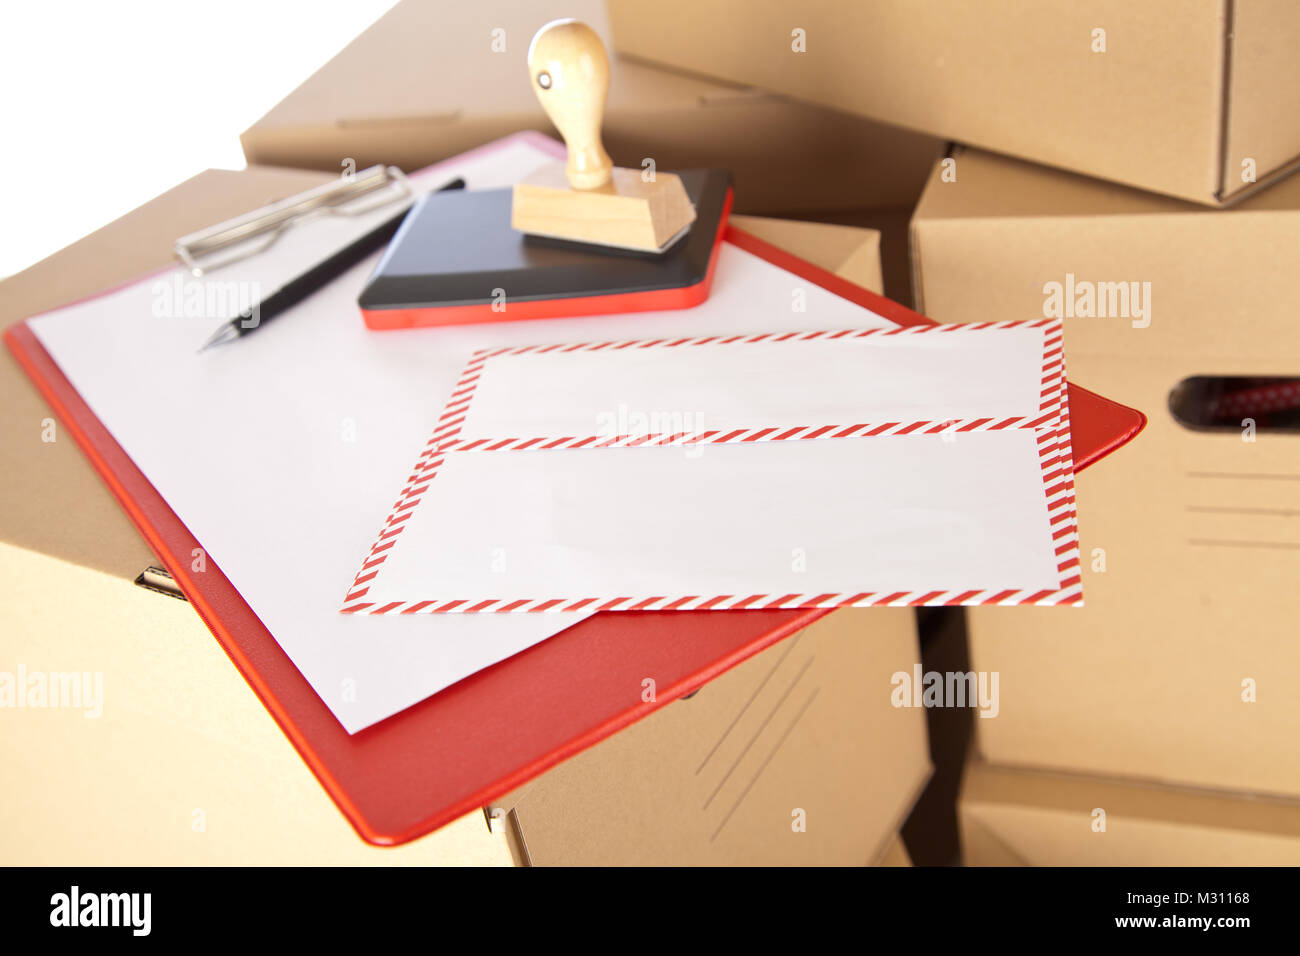 Mail envelope on cardboard boxes Stock Photo